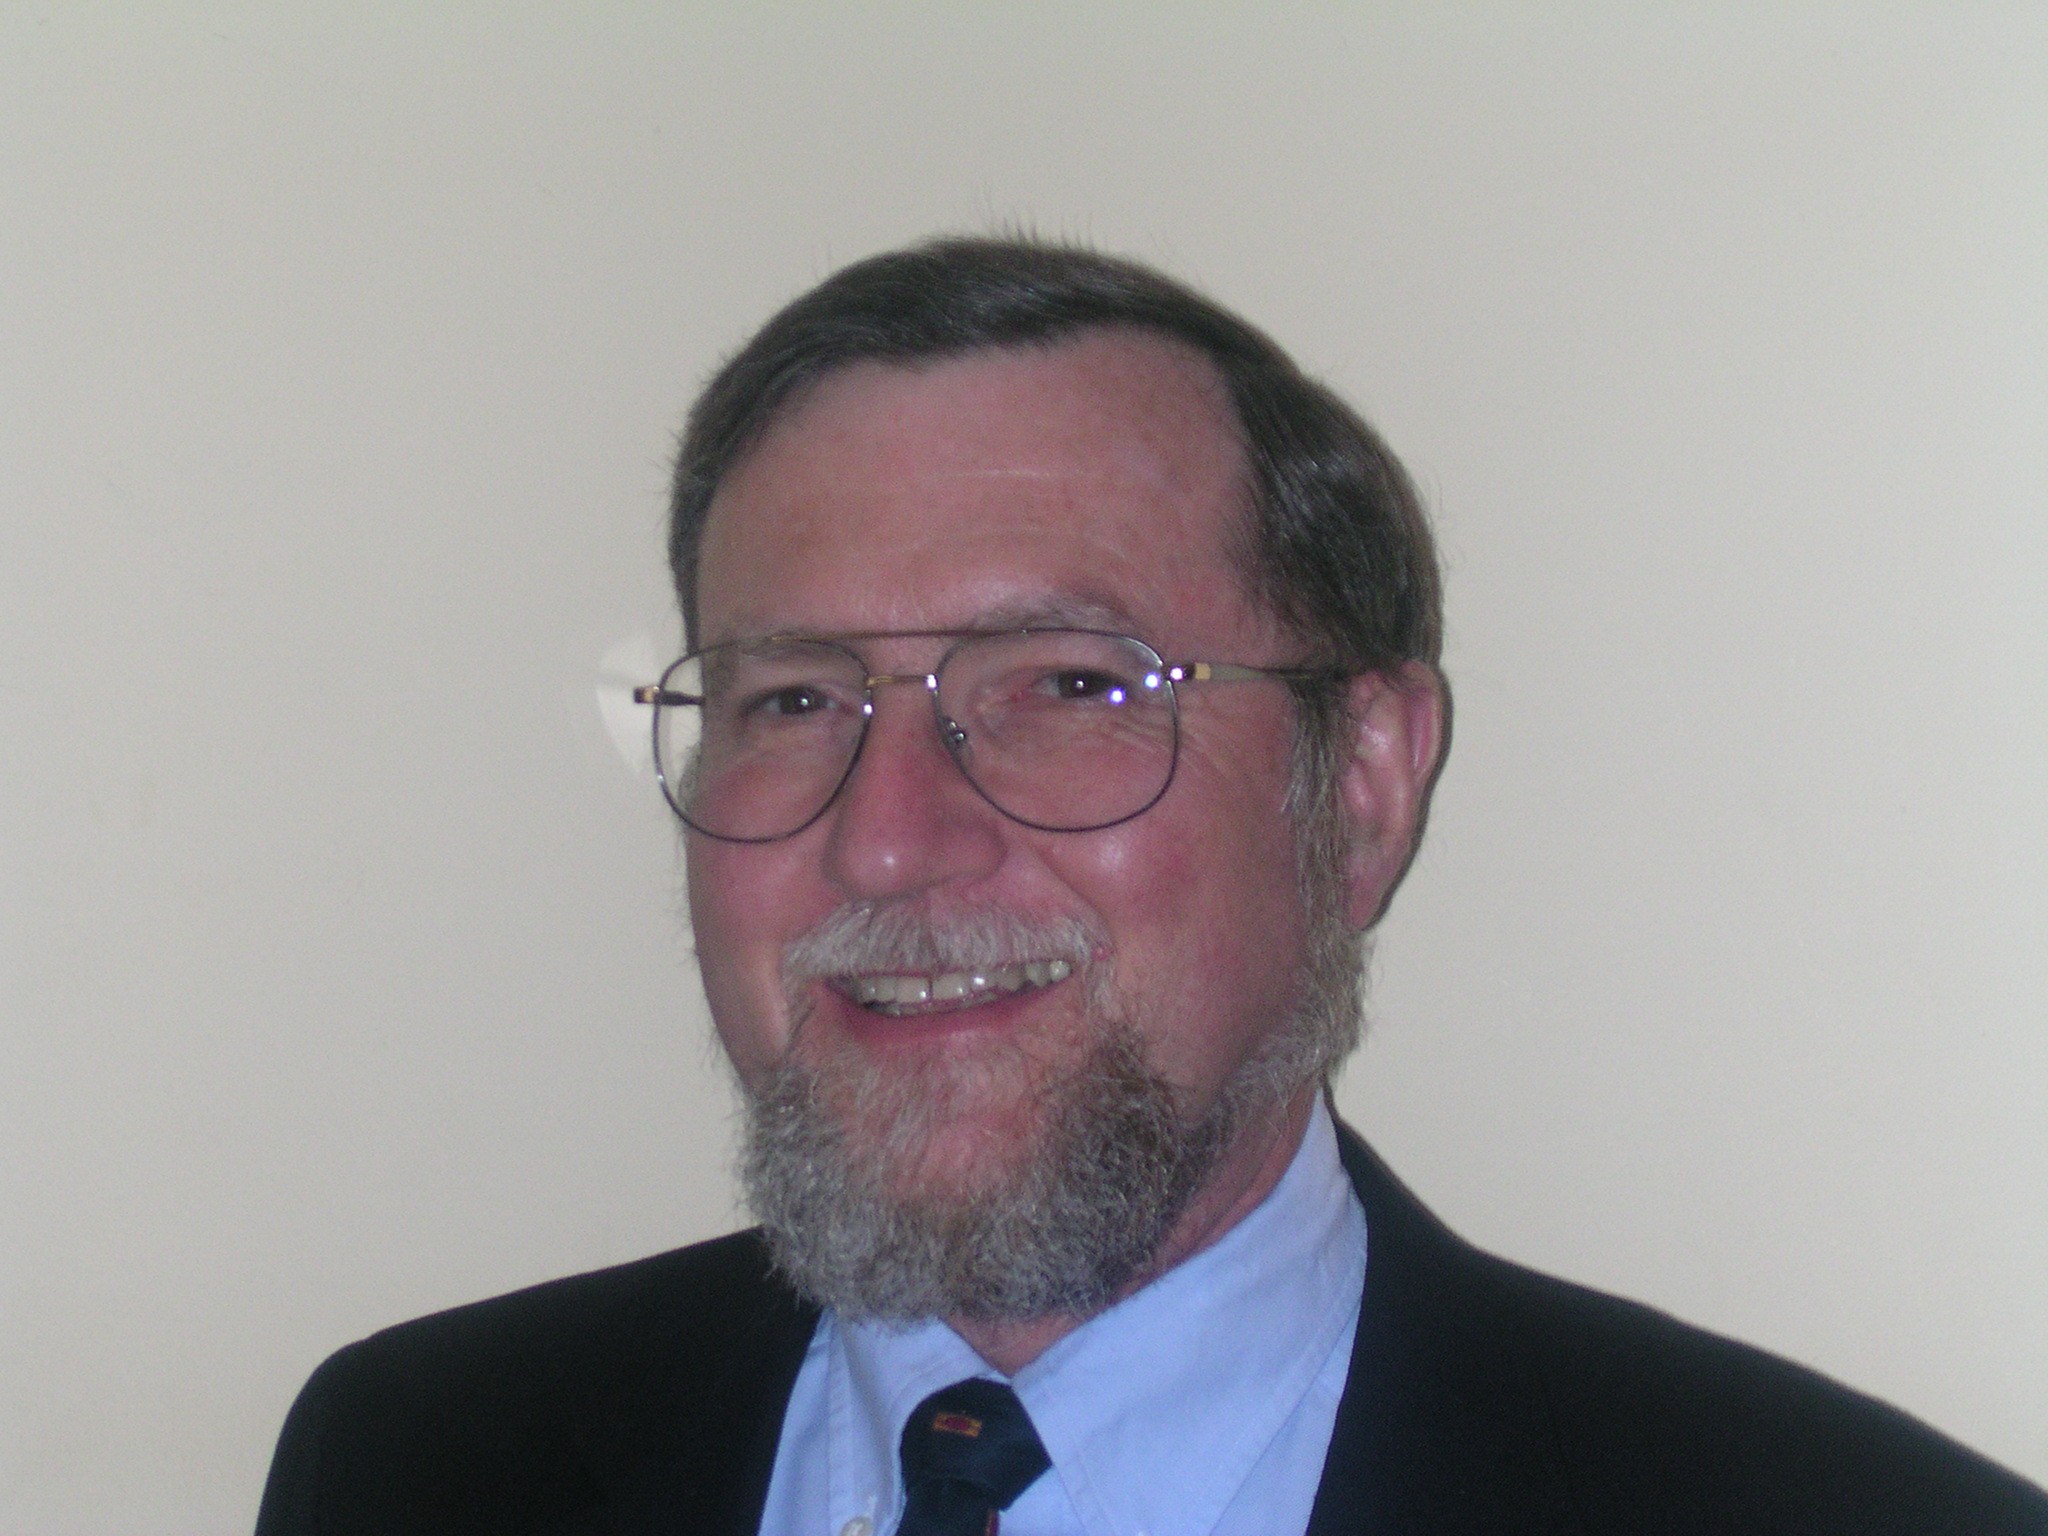 A photo showing Ian Greene. Ian wears spectacles and has brown hair with a grey beard. He is dressed in a black suit.